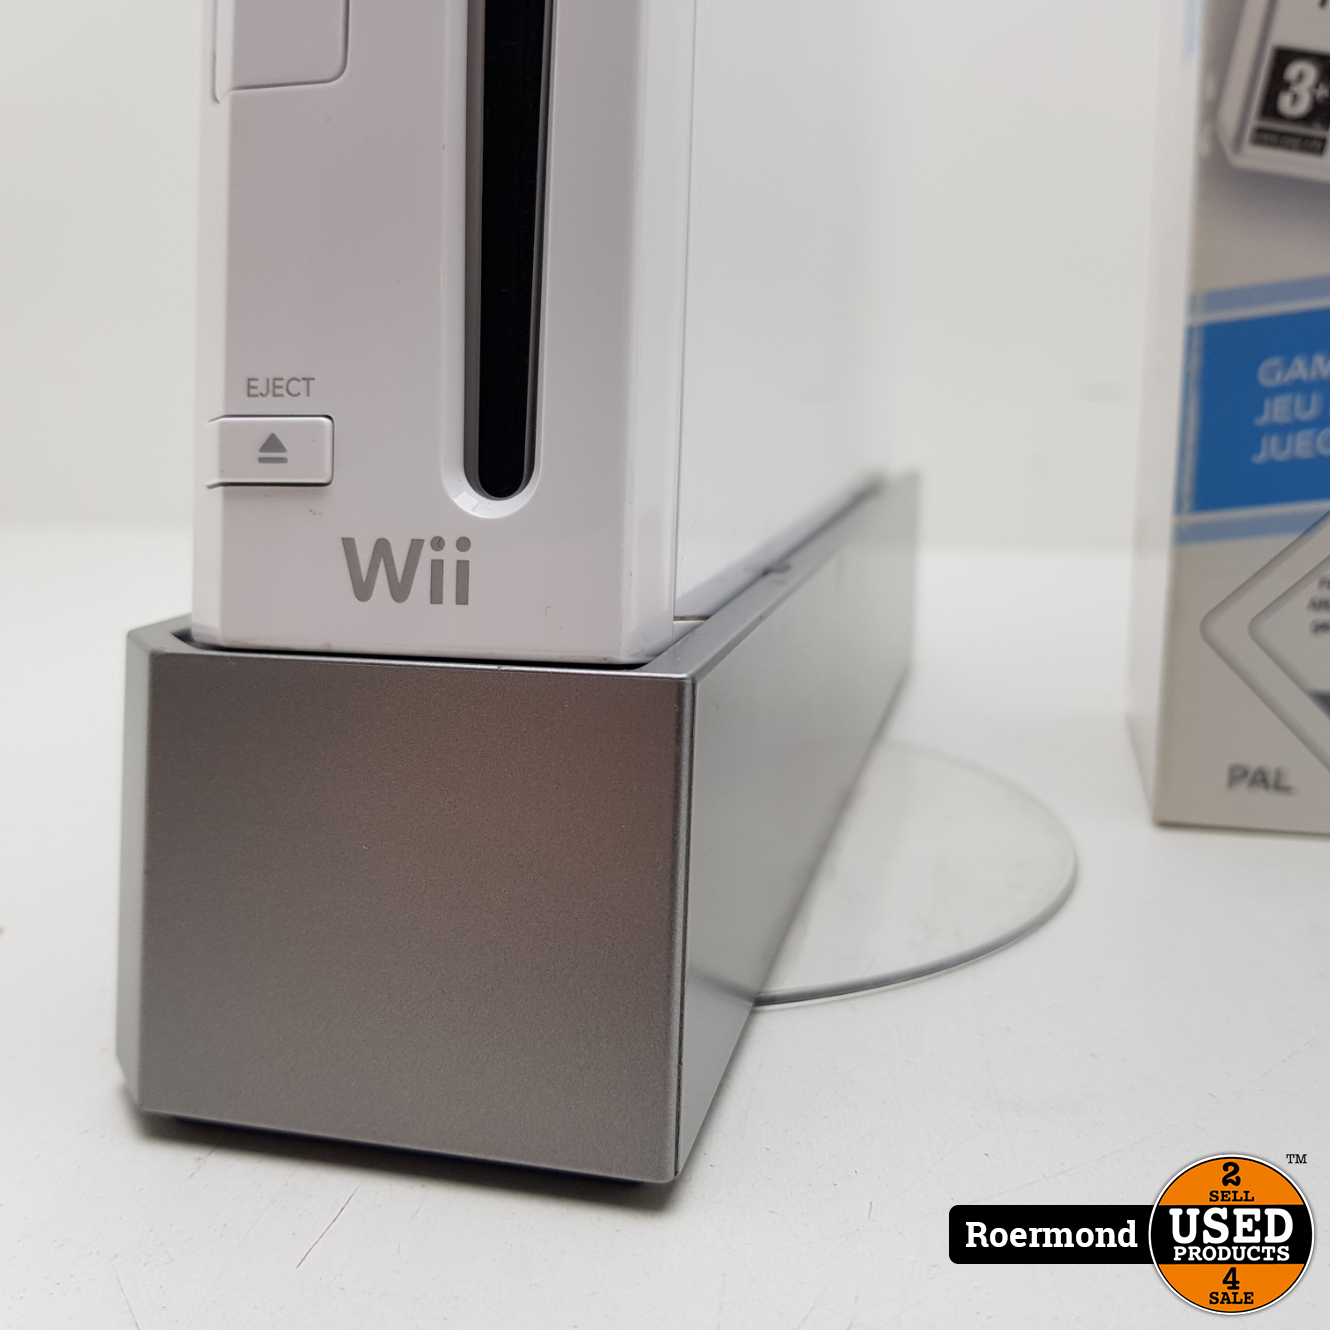 Nintendo Wii Wit met Wii Play (set inclusief controller) I Refurbished -  Used Products Roermond